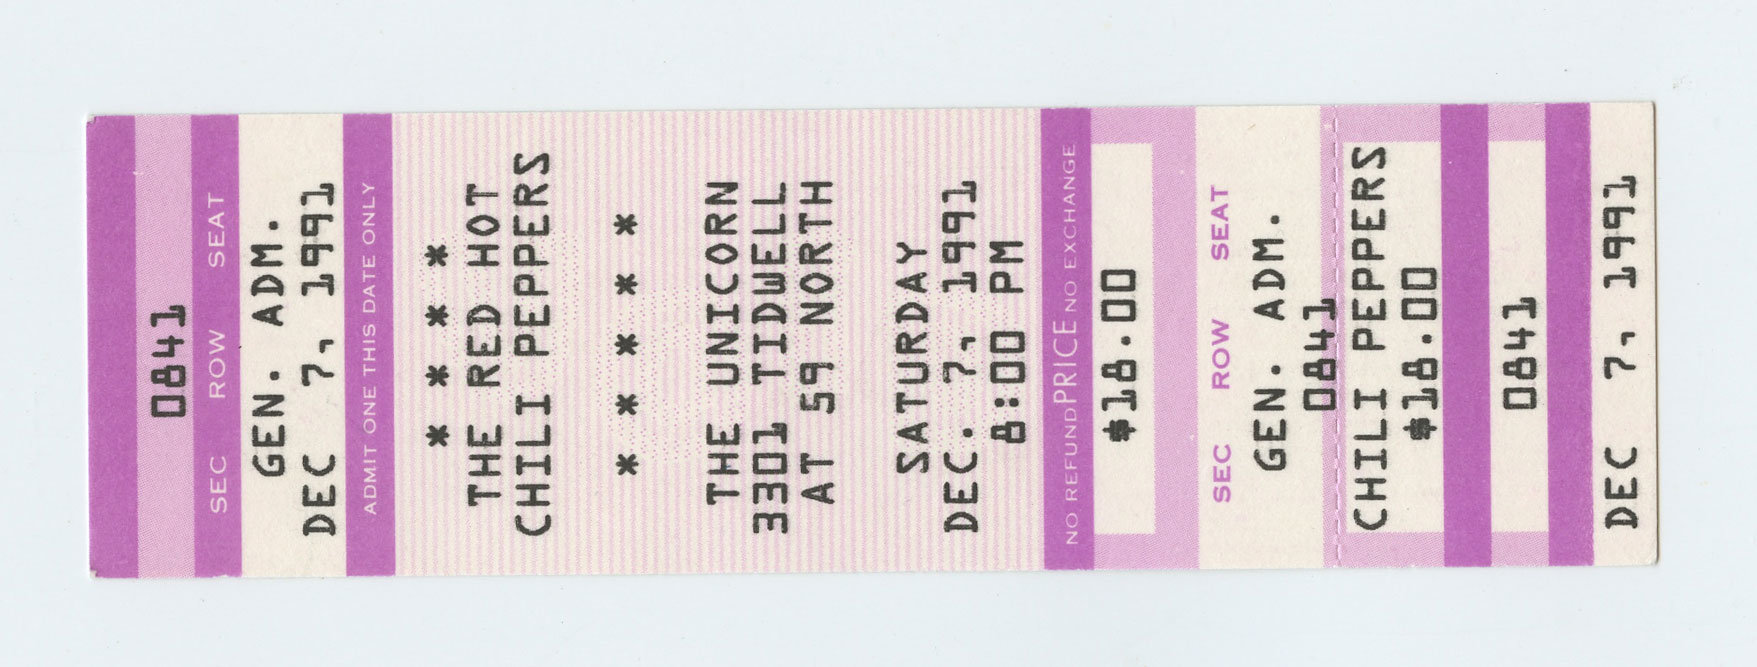 Red Hot Chili Peppers  Vintage Ticket 1991 Dec 7 The Unicorn Houston 